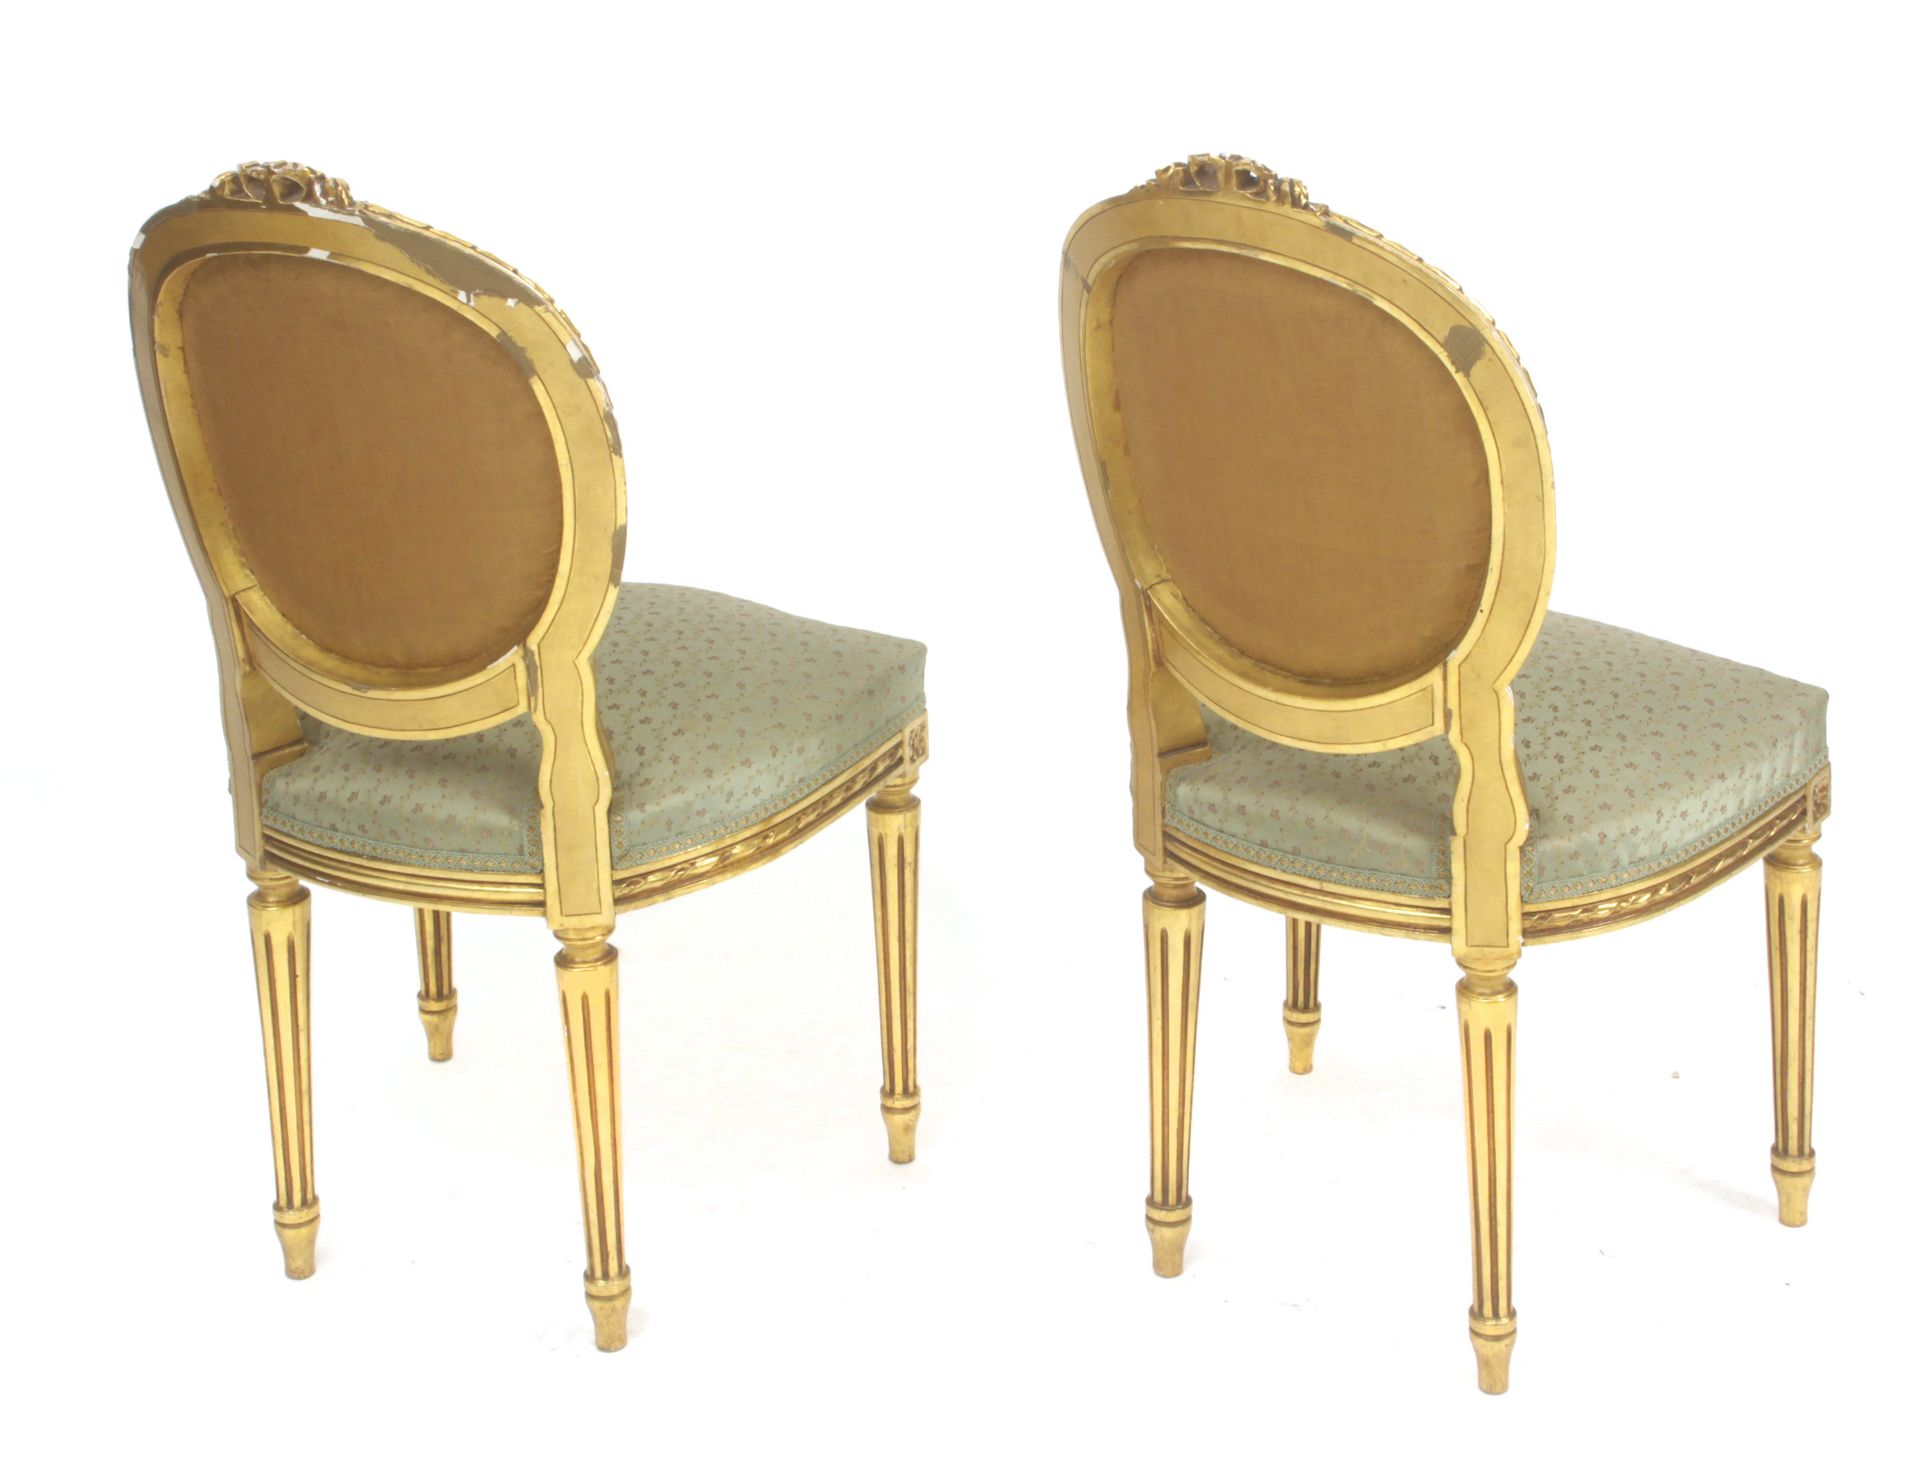 A pair of 19th century Louis XV chairs - Image 3 of 3